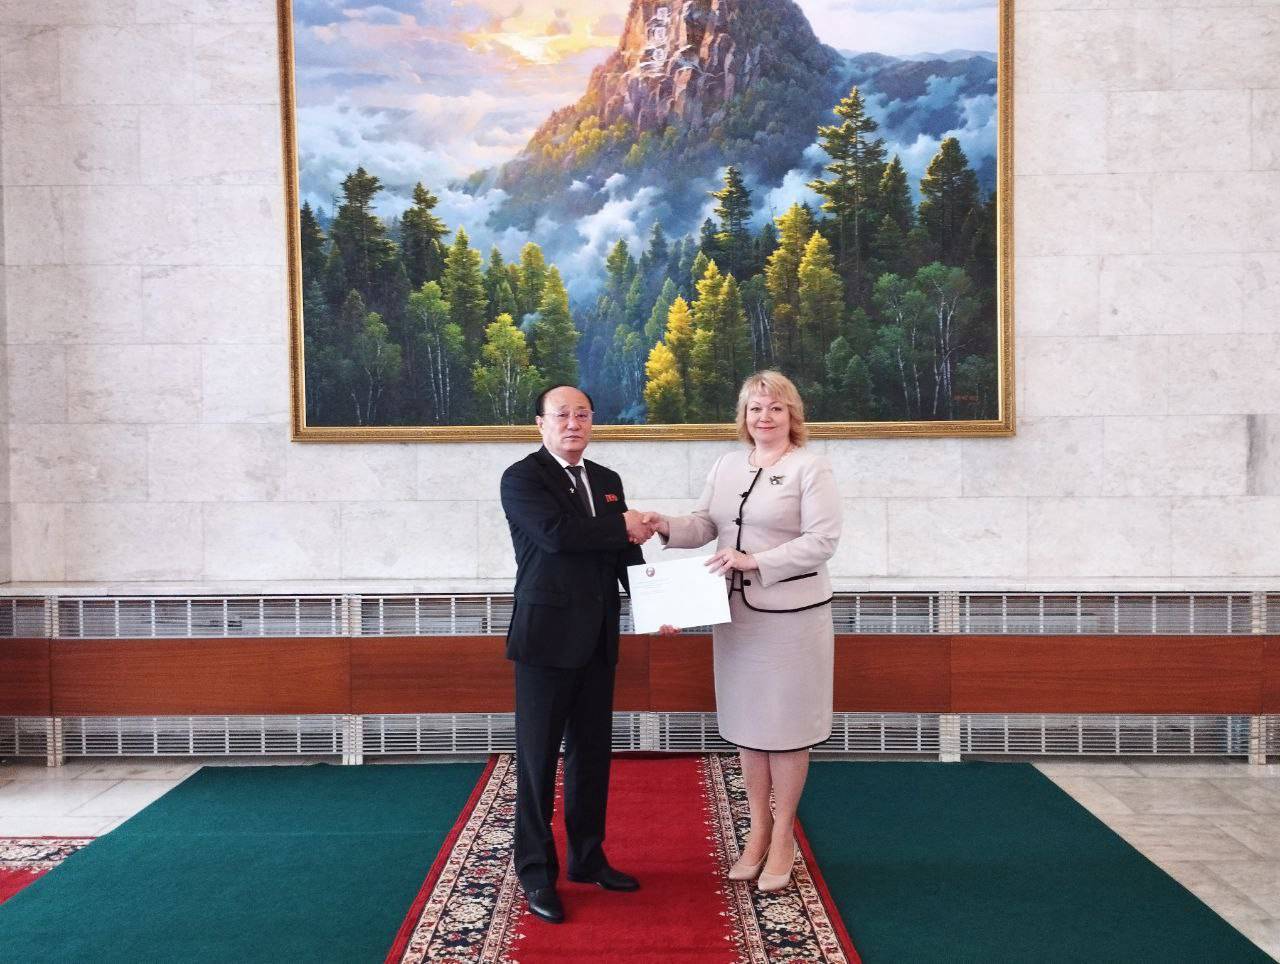 The Donetsk People's Republic Ambassador to Russia Olga Makeyeva receiving a letter of recognition from North Korea's Ambassador to Russia Sin Hong Chol at the Donetsk People's Republic Embassy in Moscow on Wednesday. | EMBASSY OF THE SELF-PROCLAIMED DONETSK PEOPLE'S REPUBLIC / VIA AFP